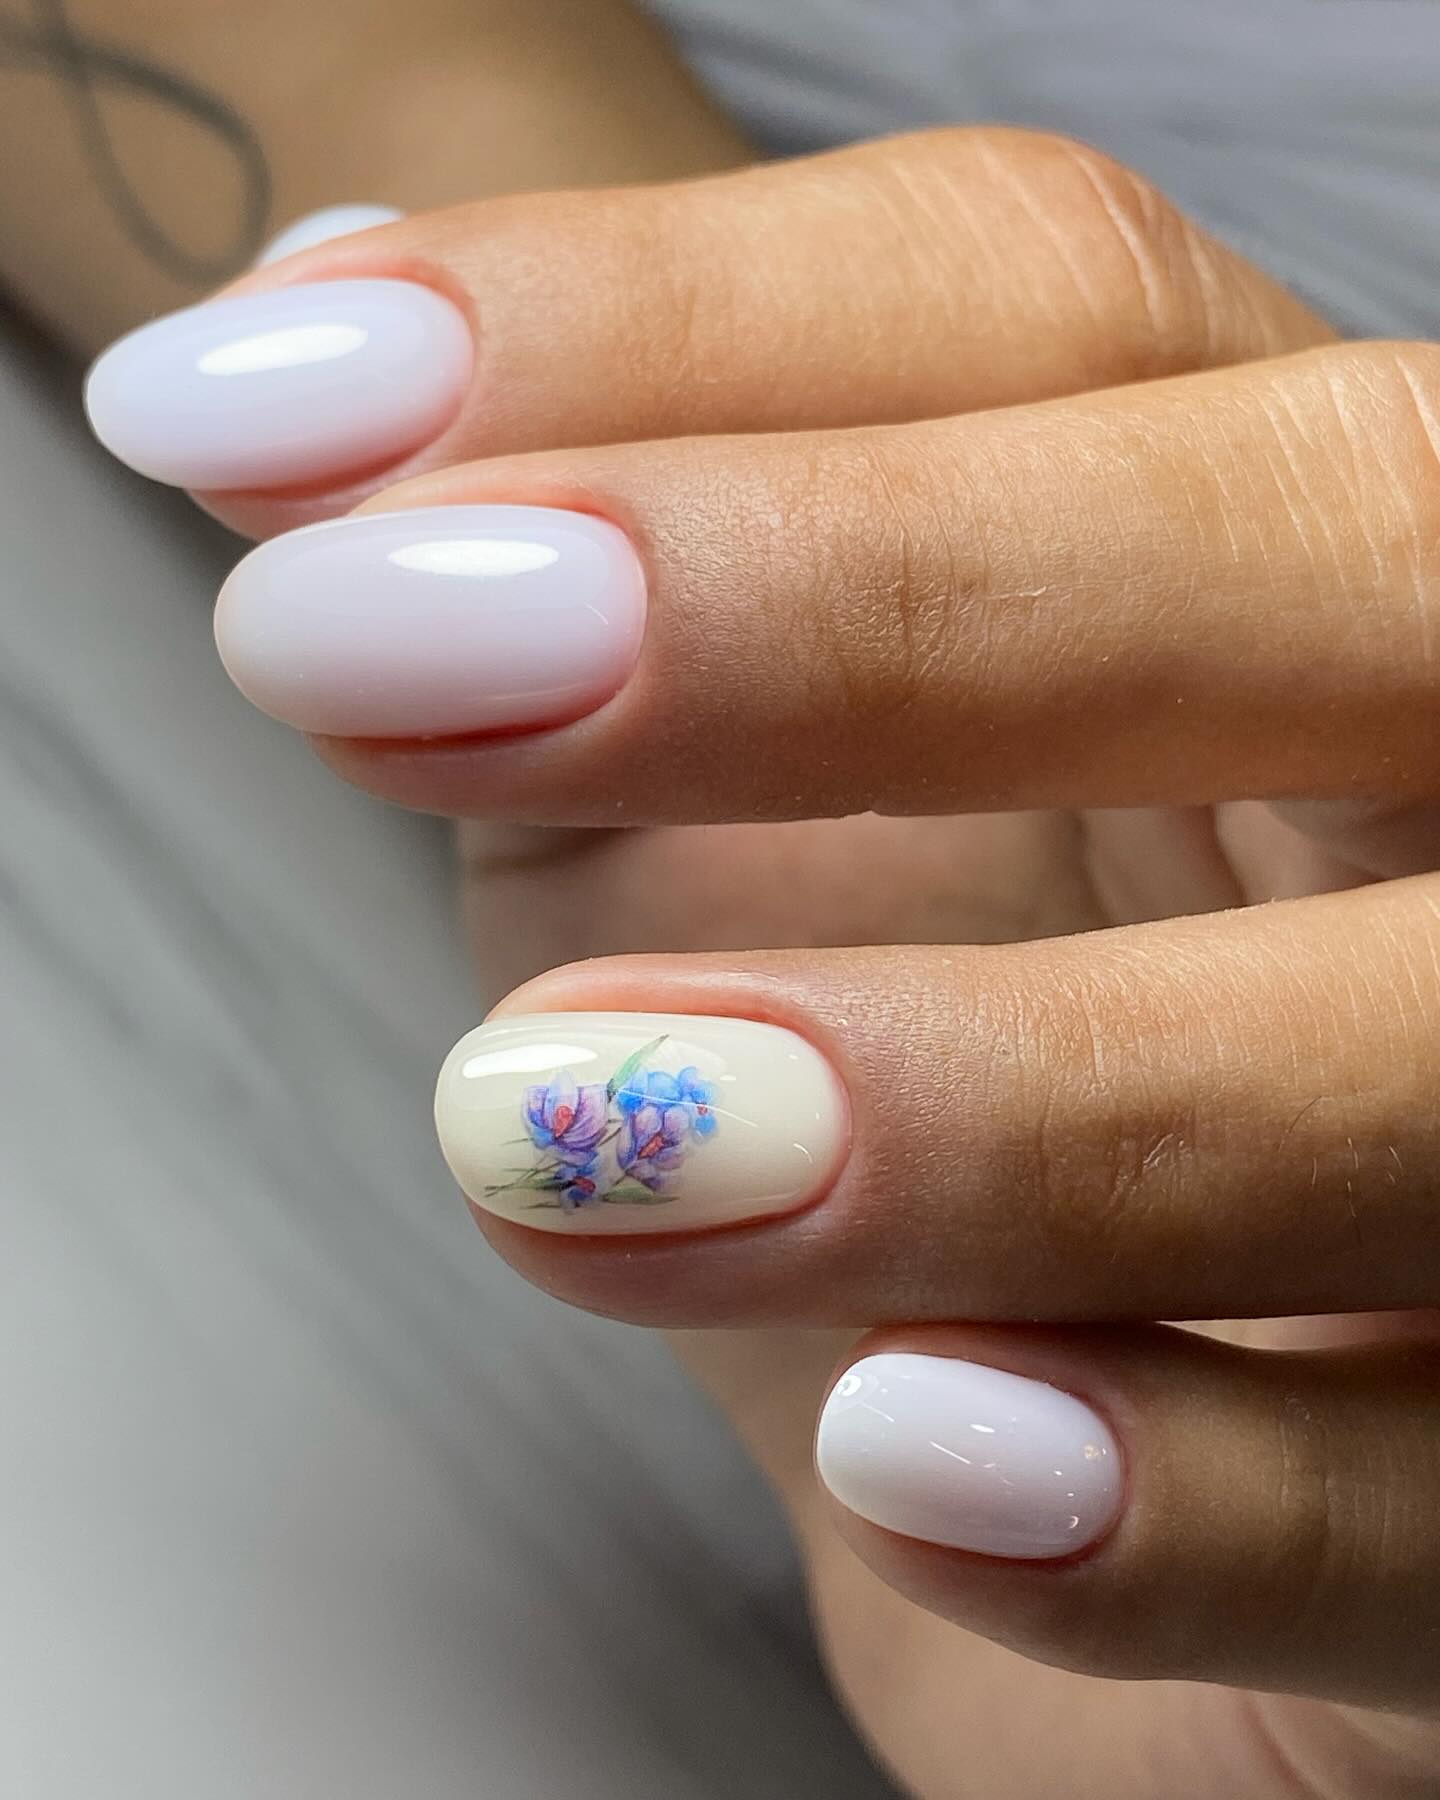 100+ Short Nail Designs You’ll Want To Try This Year images 88